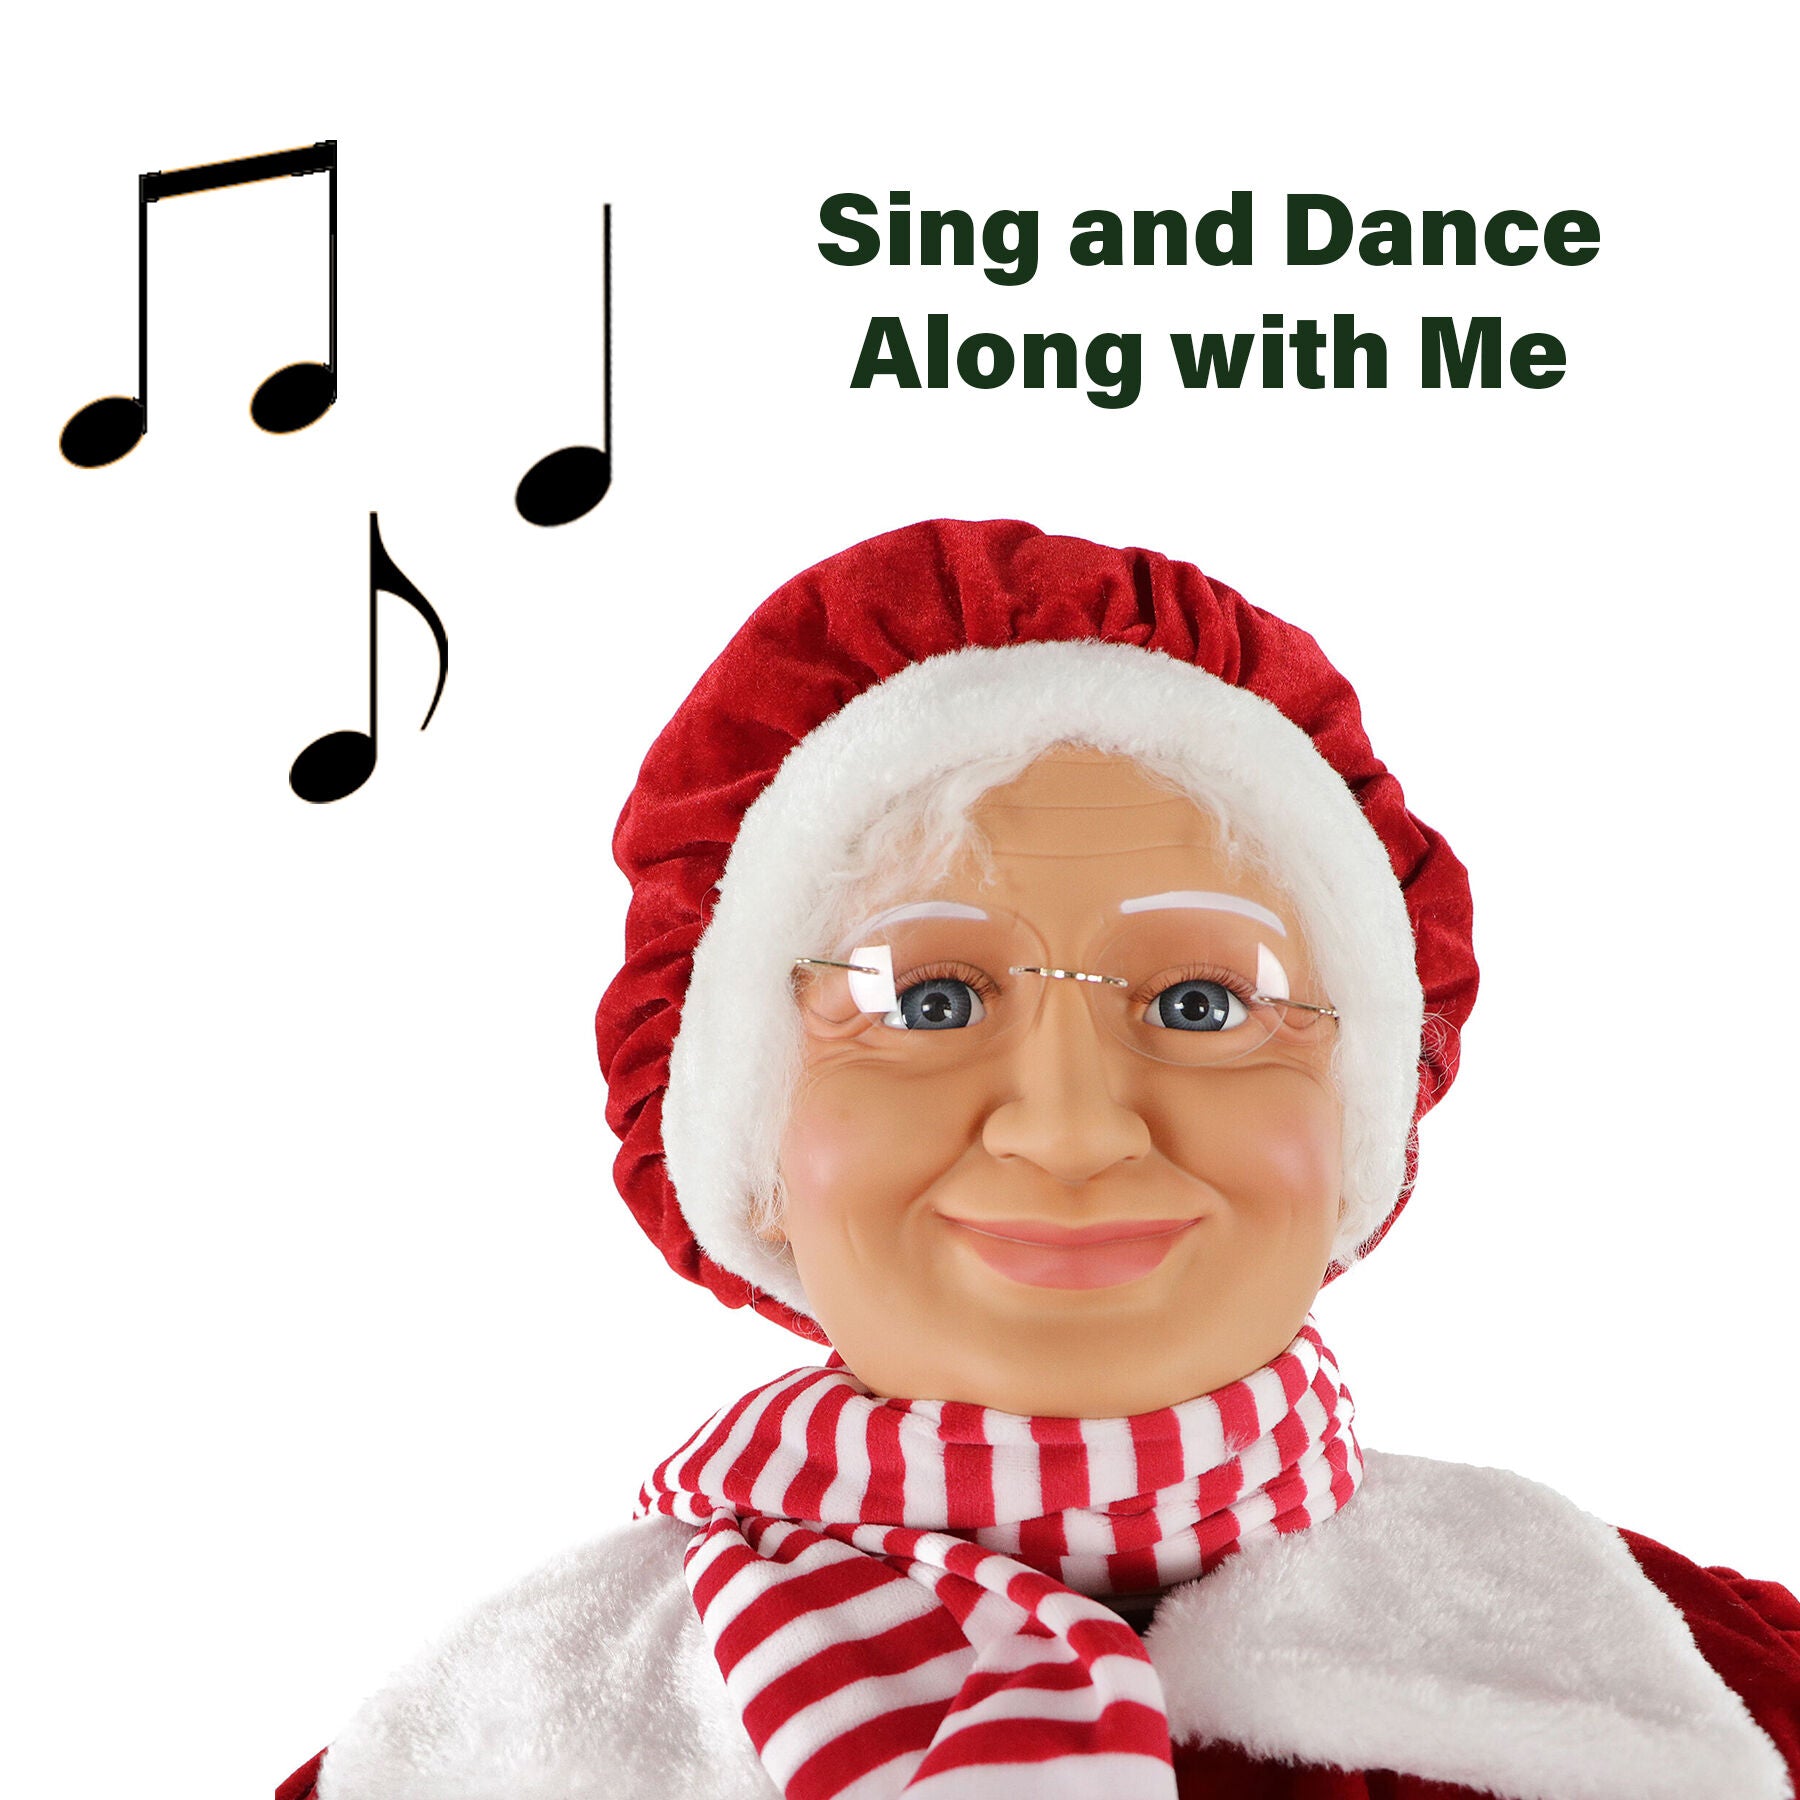 Fraser Hill Farm -  58-In. Dancing Mrs. Claus with Teddy Bear, Life-Size Motion-Activated Christmas Animatronic